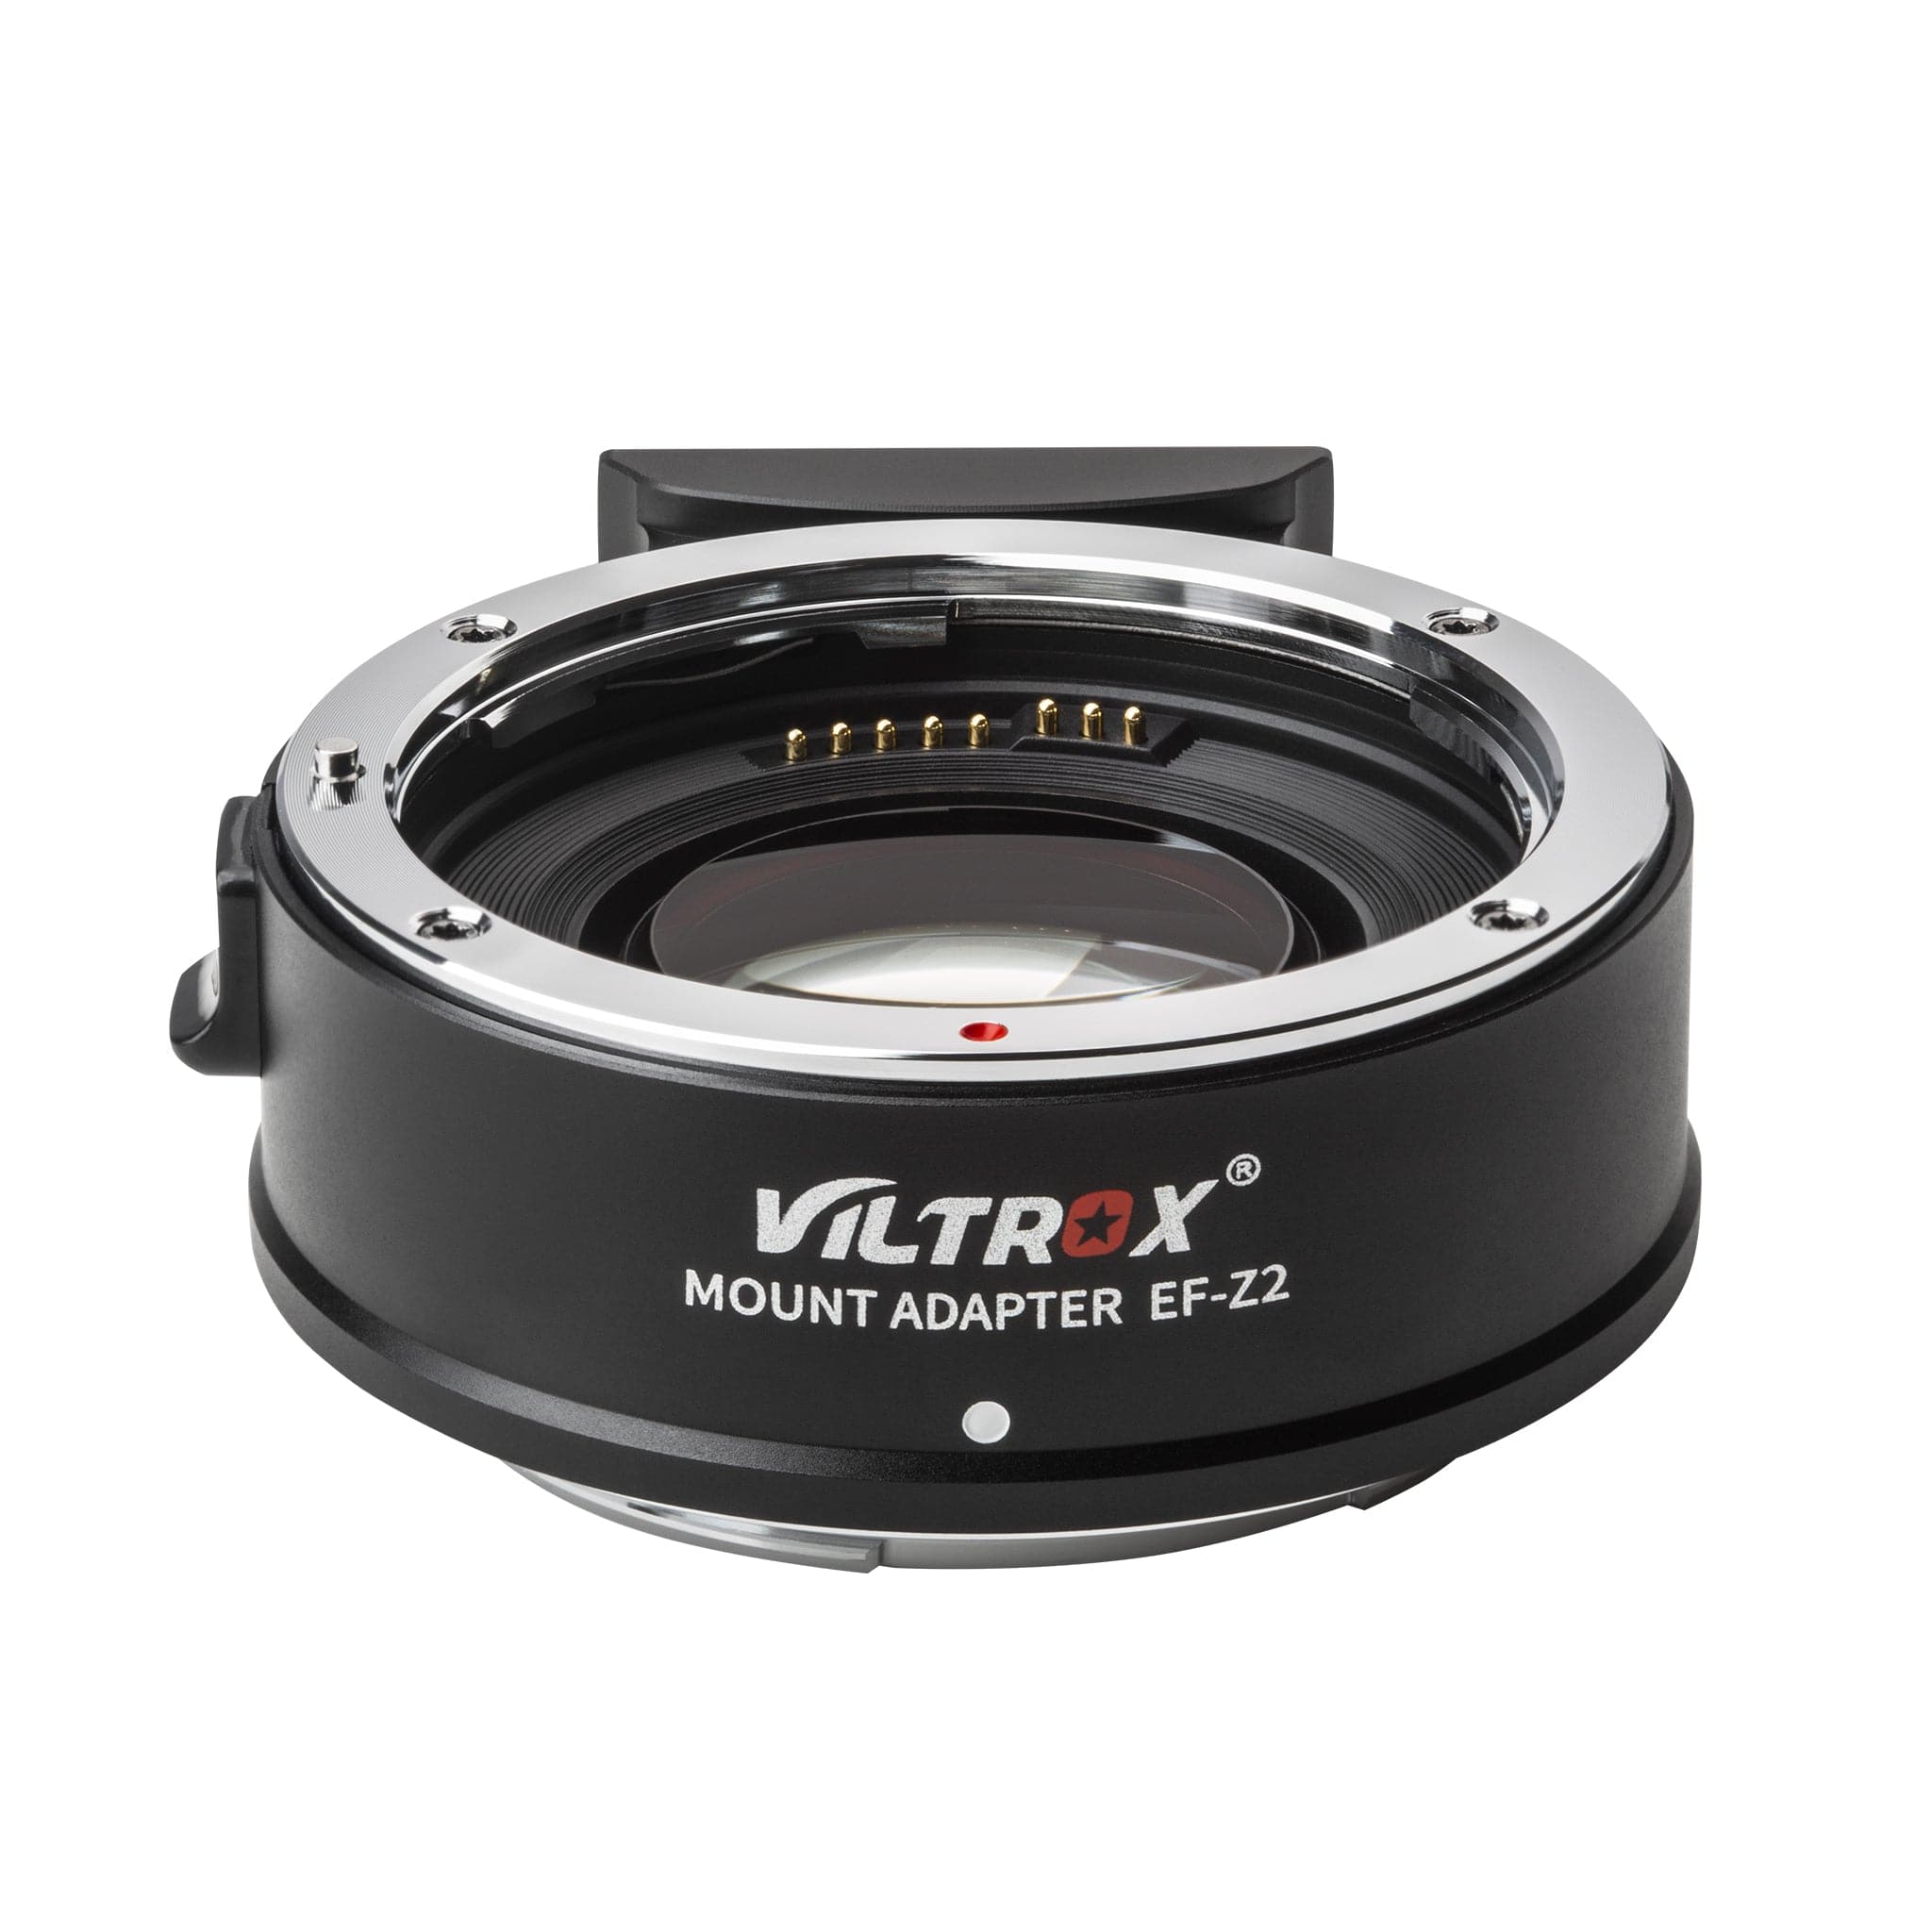 Viltrox EF-Z2 Speed Booster Allows Canon EF lenses Used on Nikon Z-mount